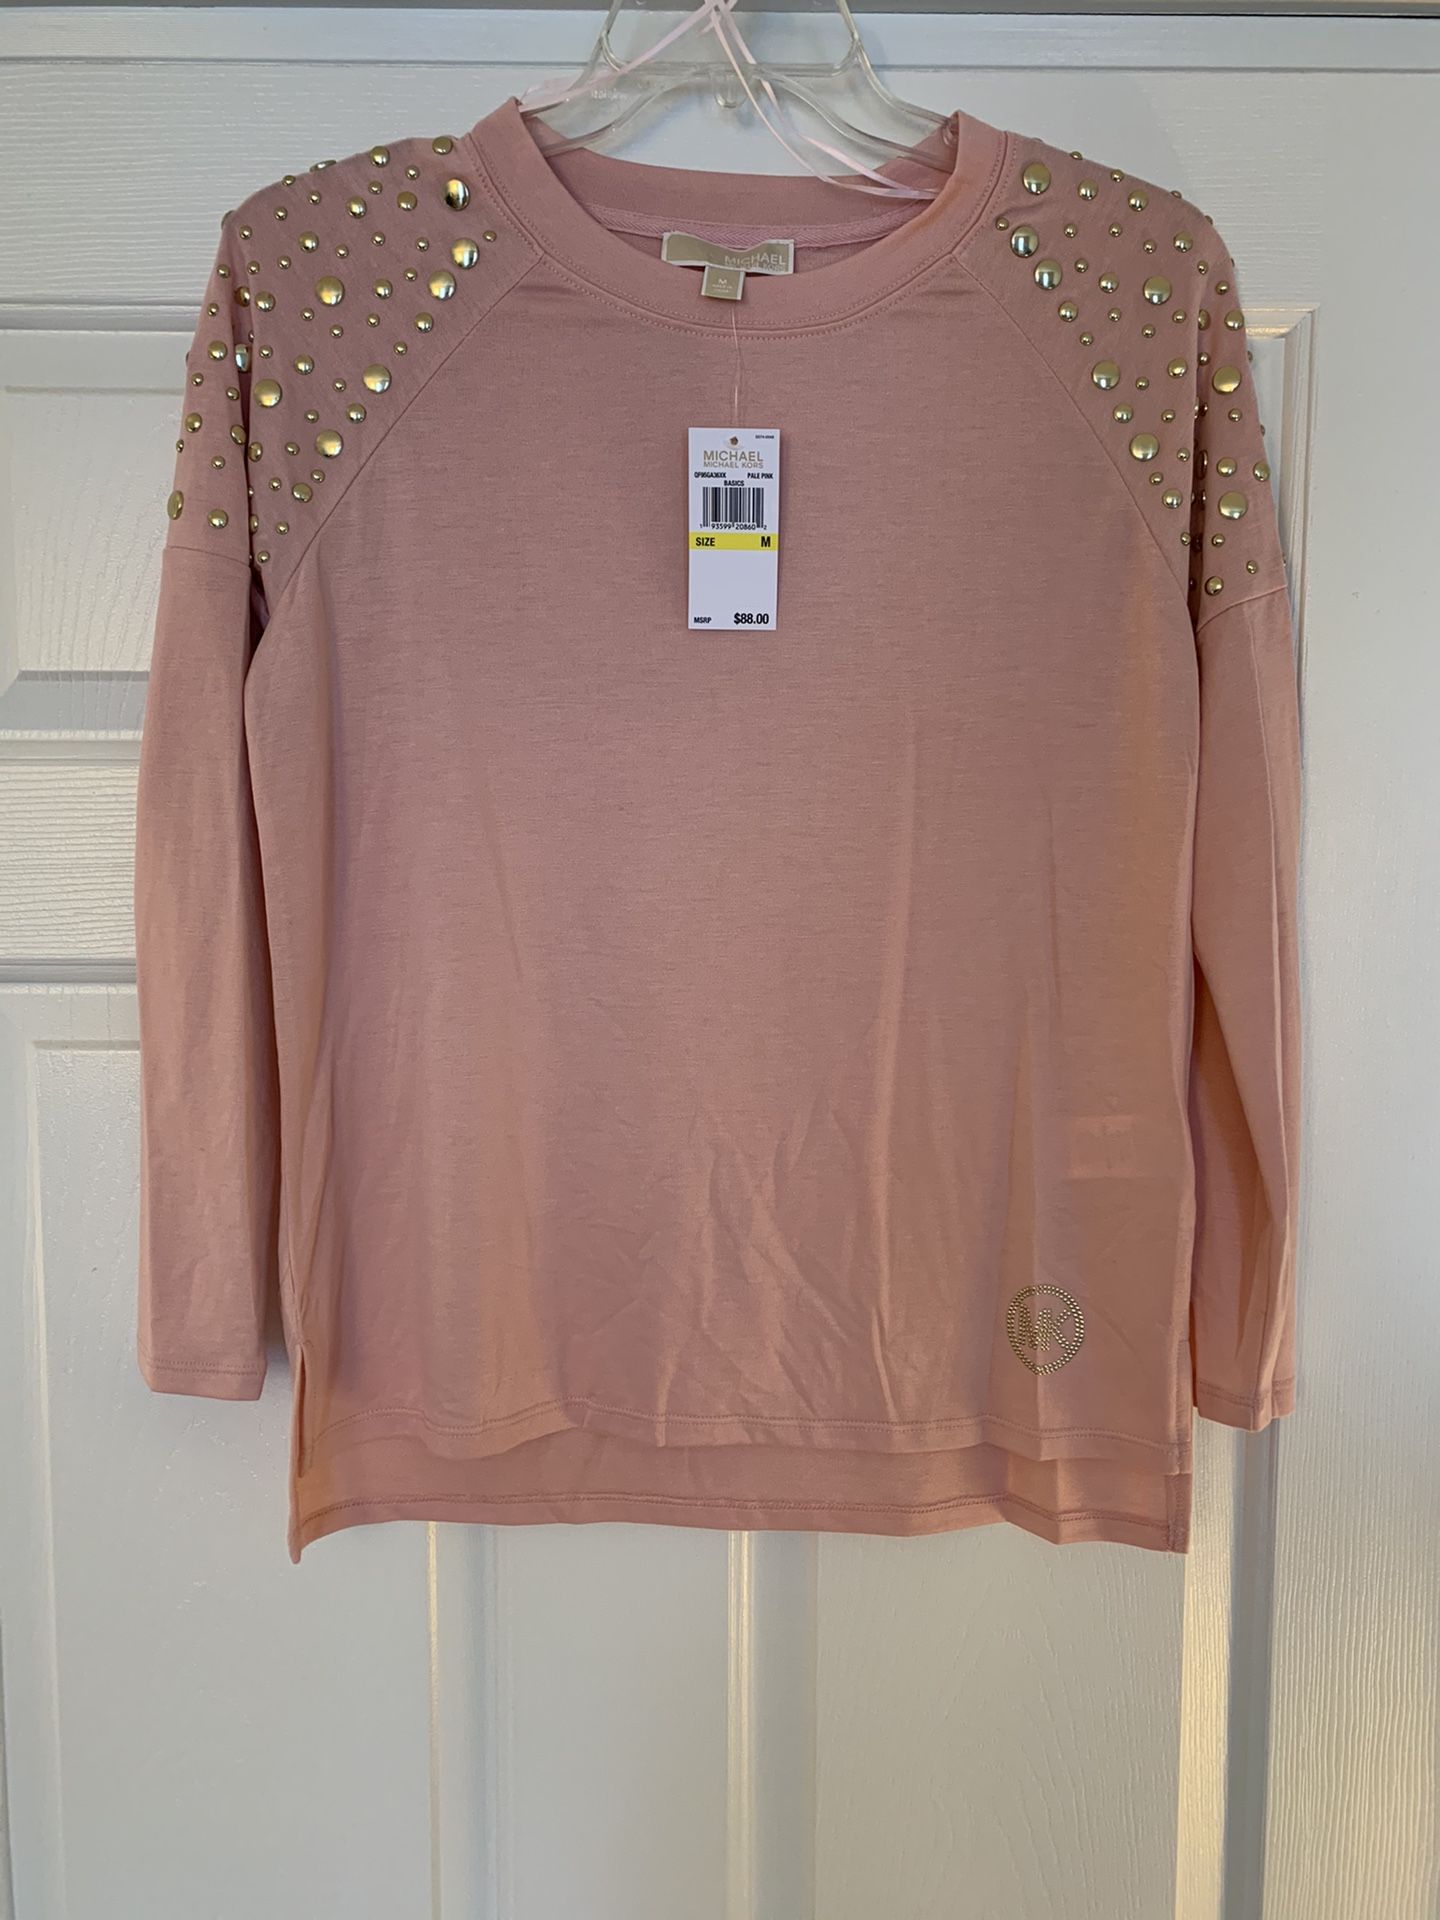 Michael Kors Blouse - Brand New with tags!